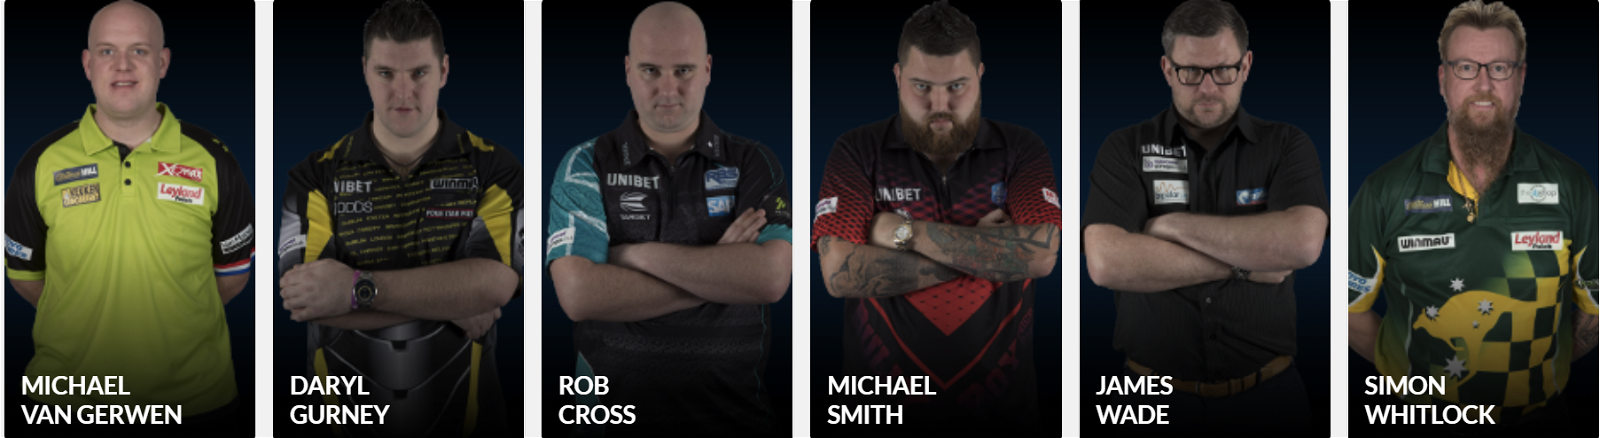 PDC Home Tour Live Stream 2020 Where to watch PDC 2020 Live Streaming Free!